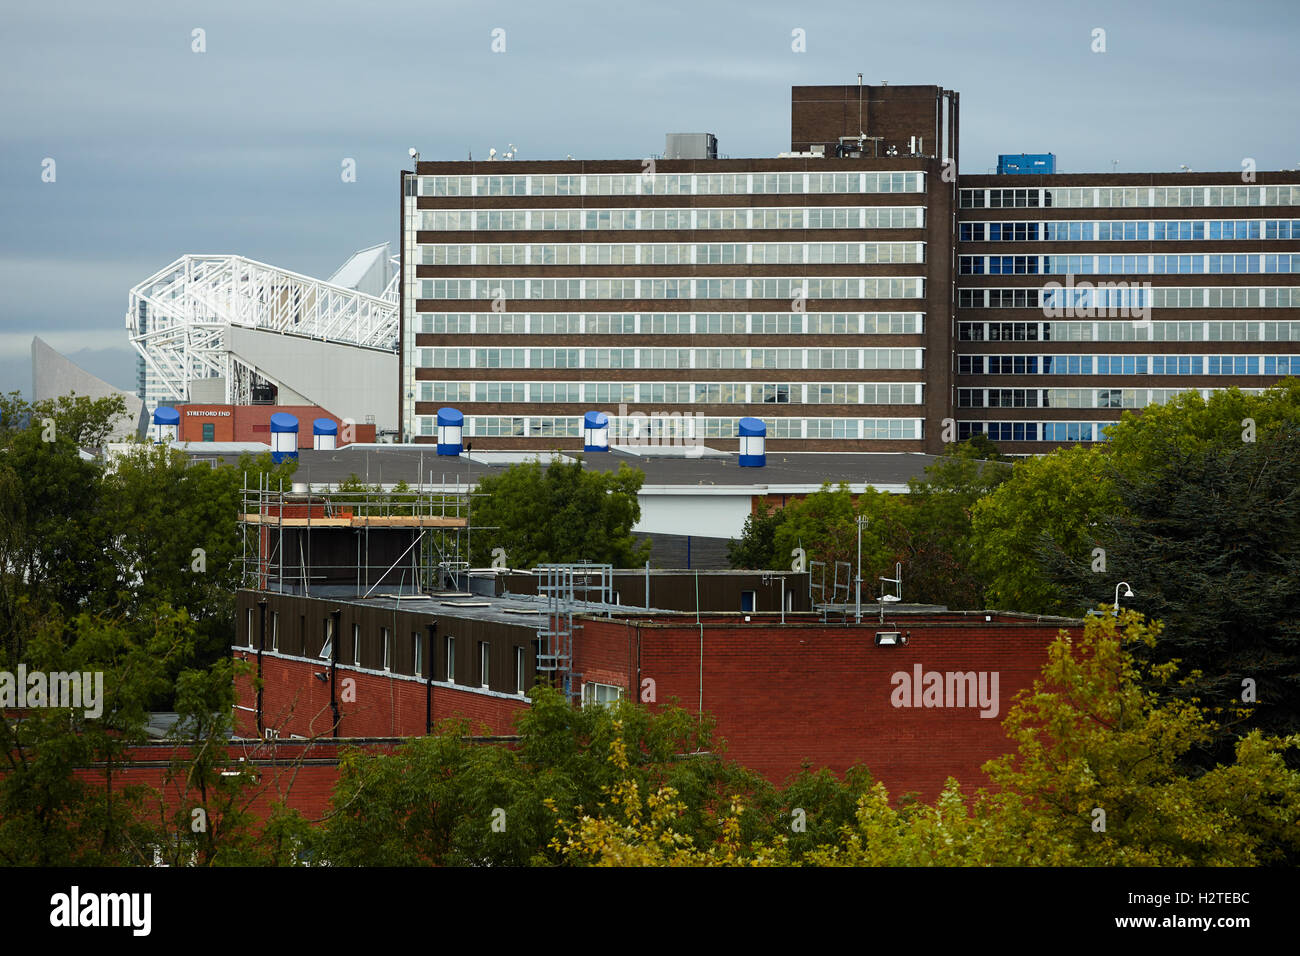 Old trafford office stadium   Skyline showing mix of offices and the football club stands copyspace Stock Photo